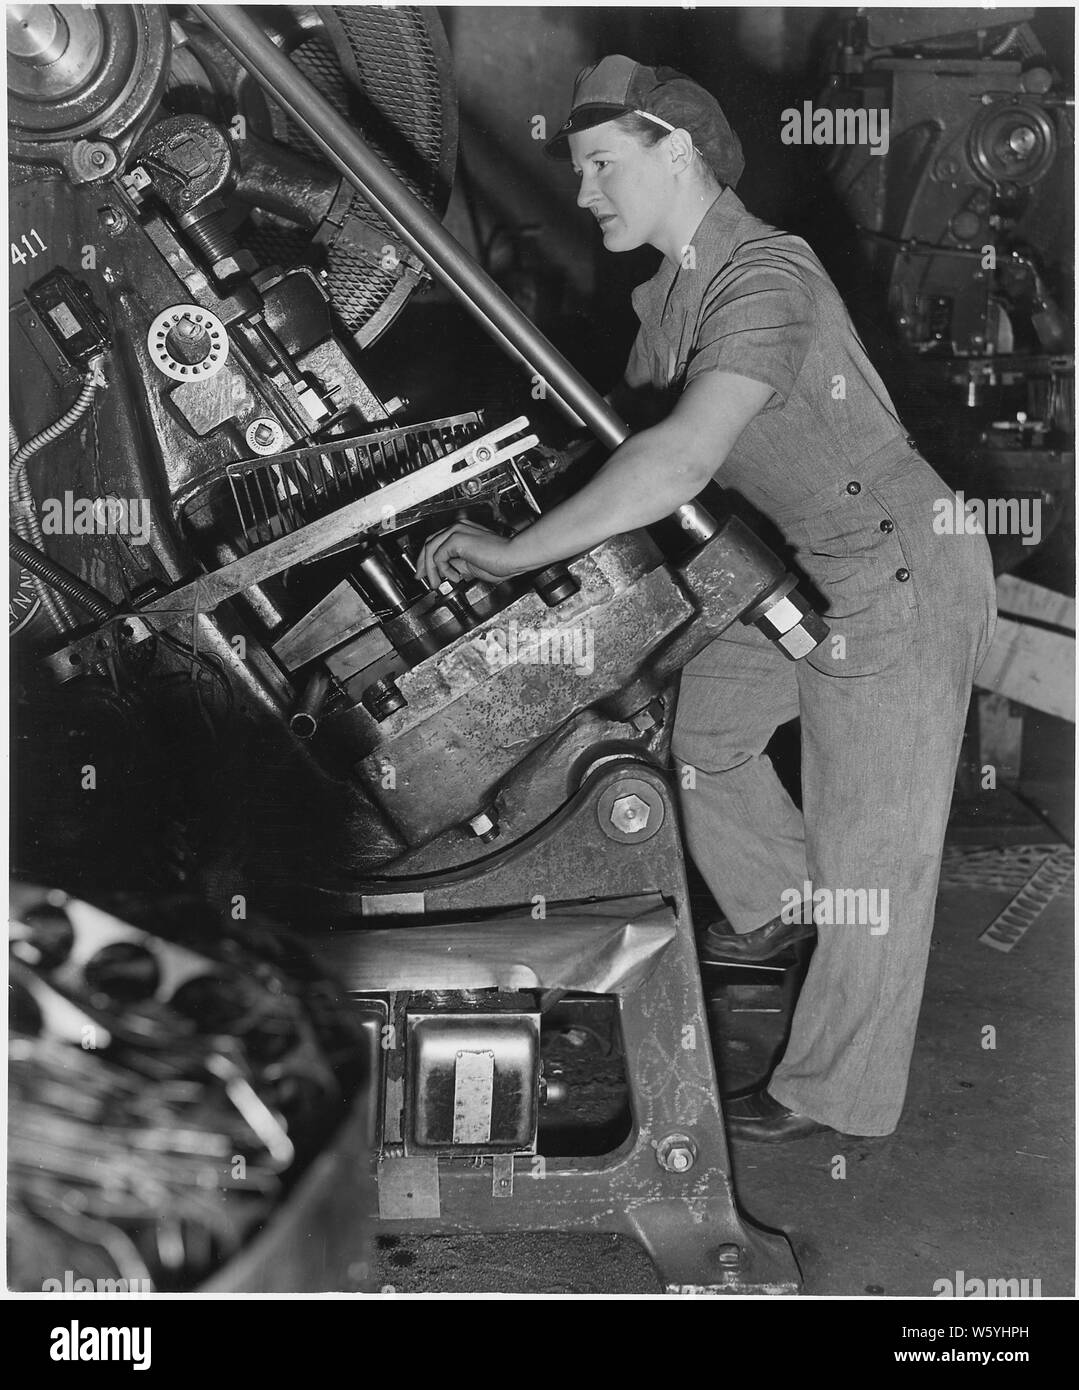 Virginia Ludwig goes to work on a punch press, stamping out discs from steel strips. Her well-fitting uniform is devoid of unecessary pleats, trimmings, doodads - is just right for the job. Stock Photo